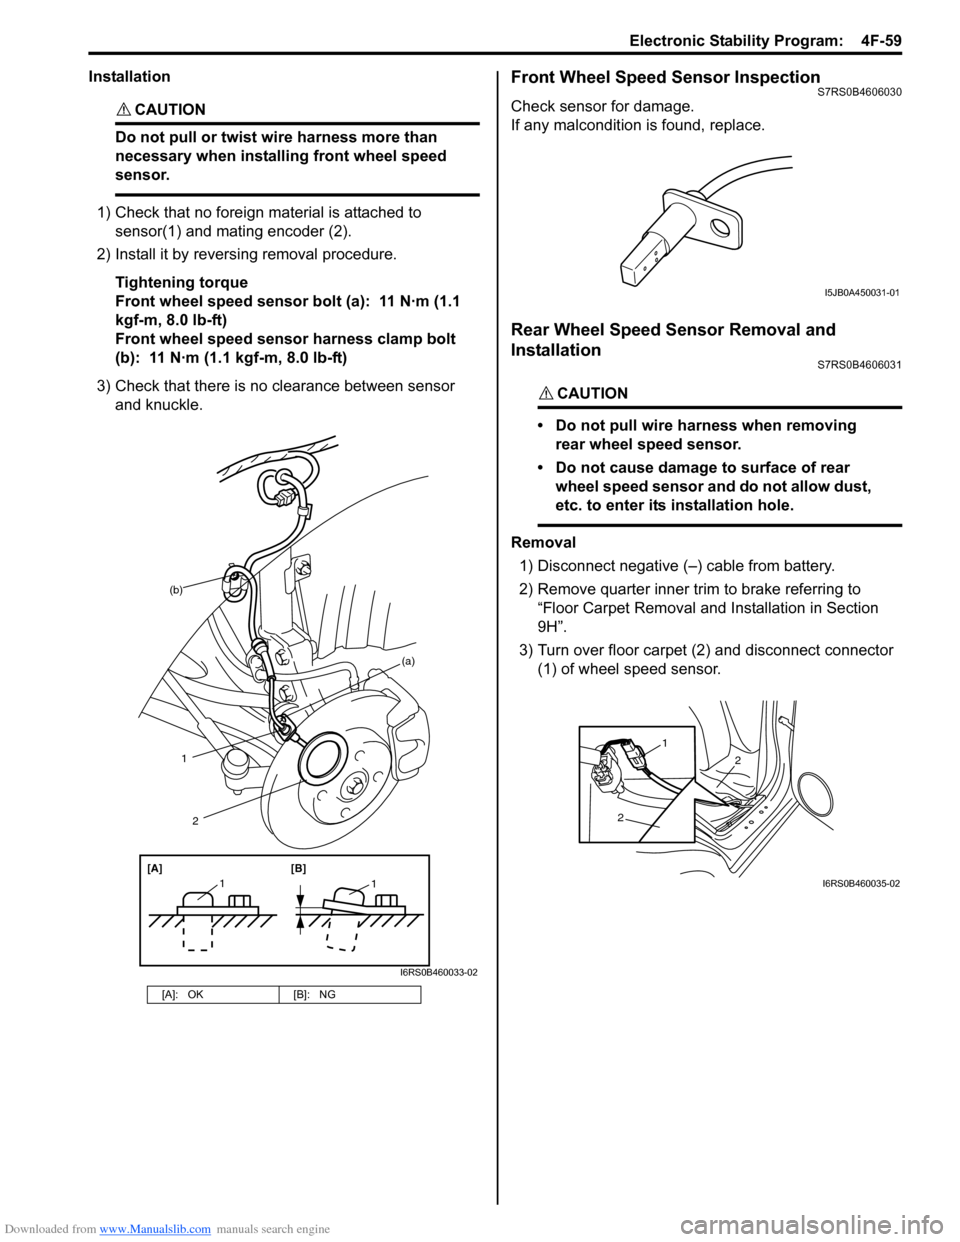 SUZUKI SWIFT 2006 2.G Service Repair Manual Downloaded from www.Manualslib.com manuals search engine Electronic Stability Program:  4F-59
Installation
CAUTION! 
Do not pull or twist wire harness more than 
necessary when installing front wheel 